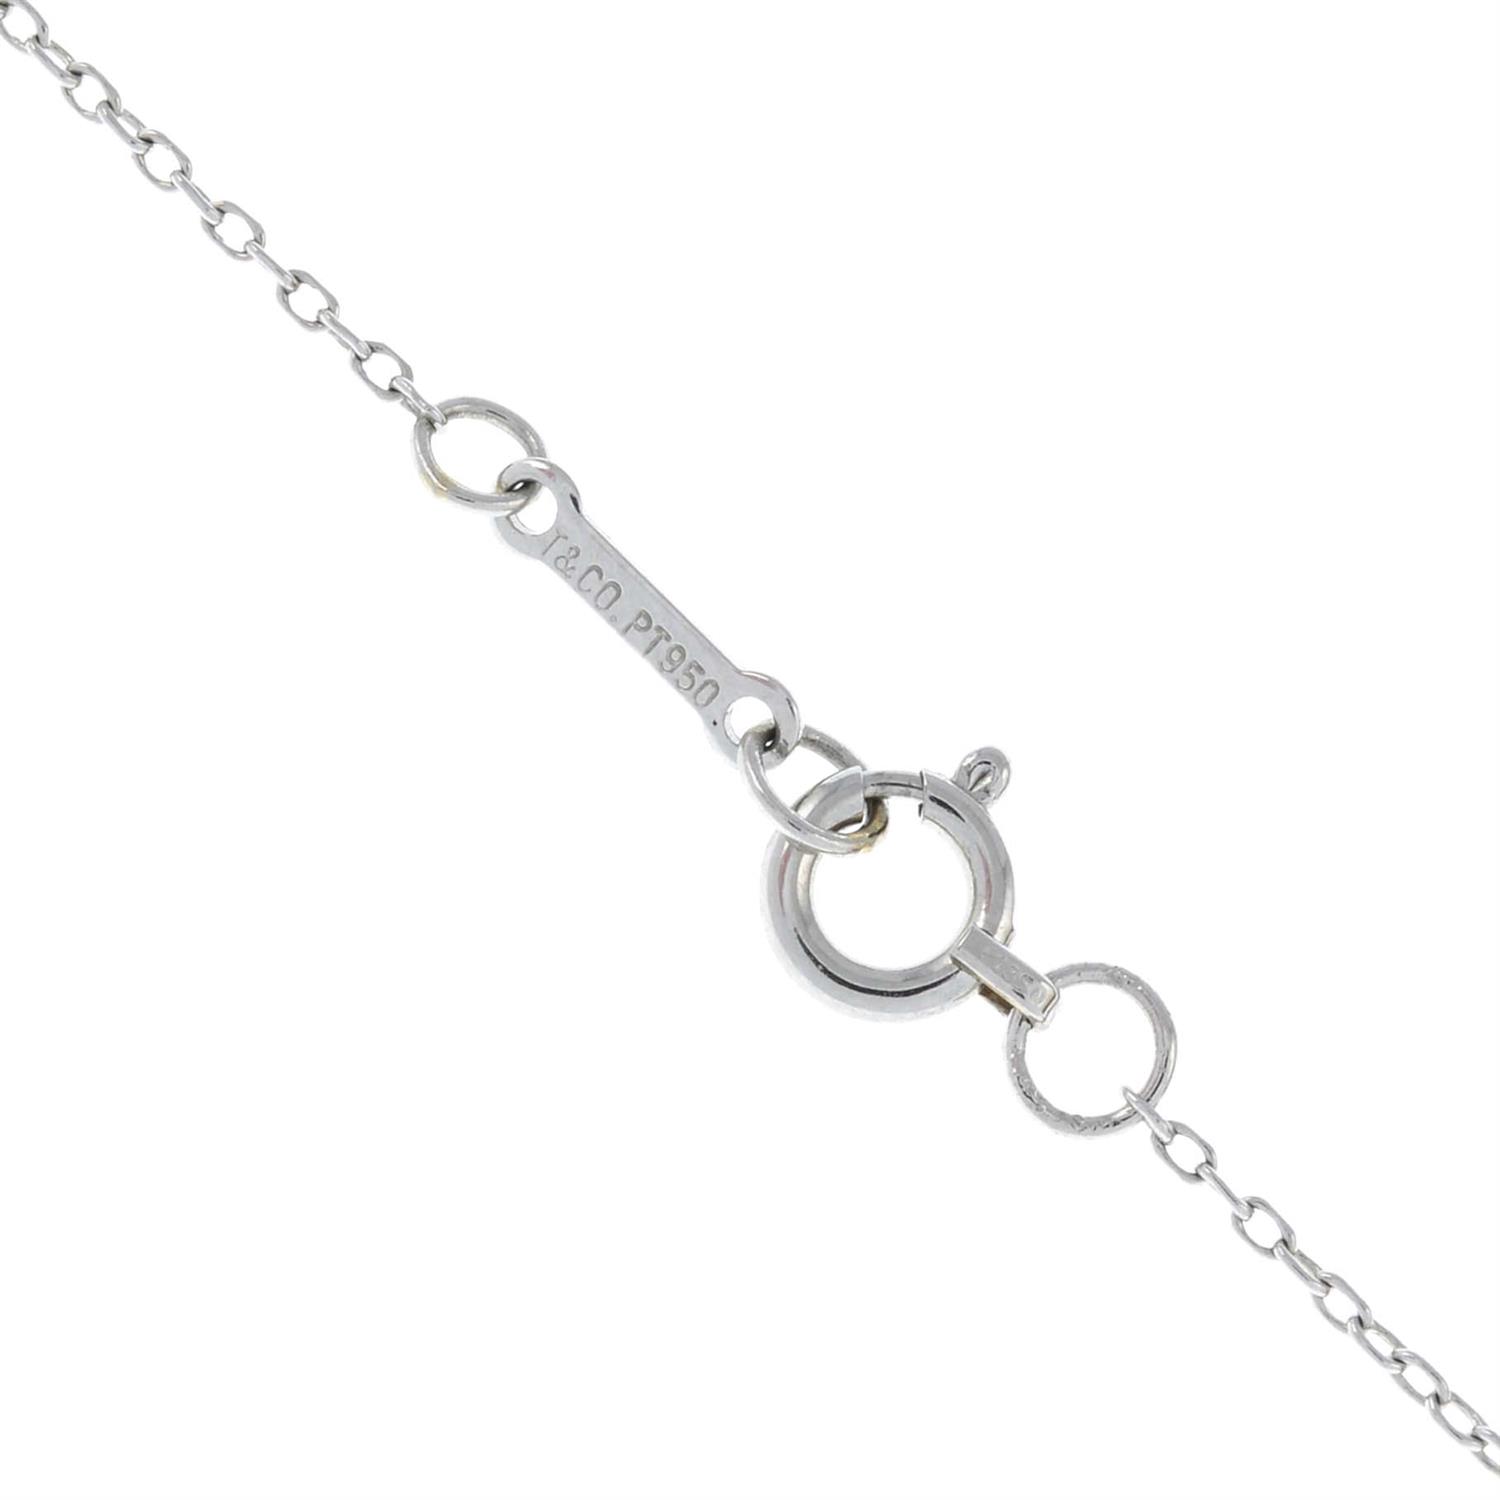 A cross pendant, with chain, by Elsa Peretti for Tiffany & Co. - Image 3 of 3